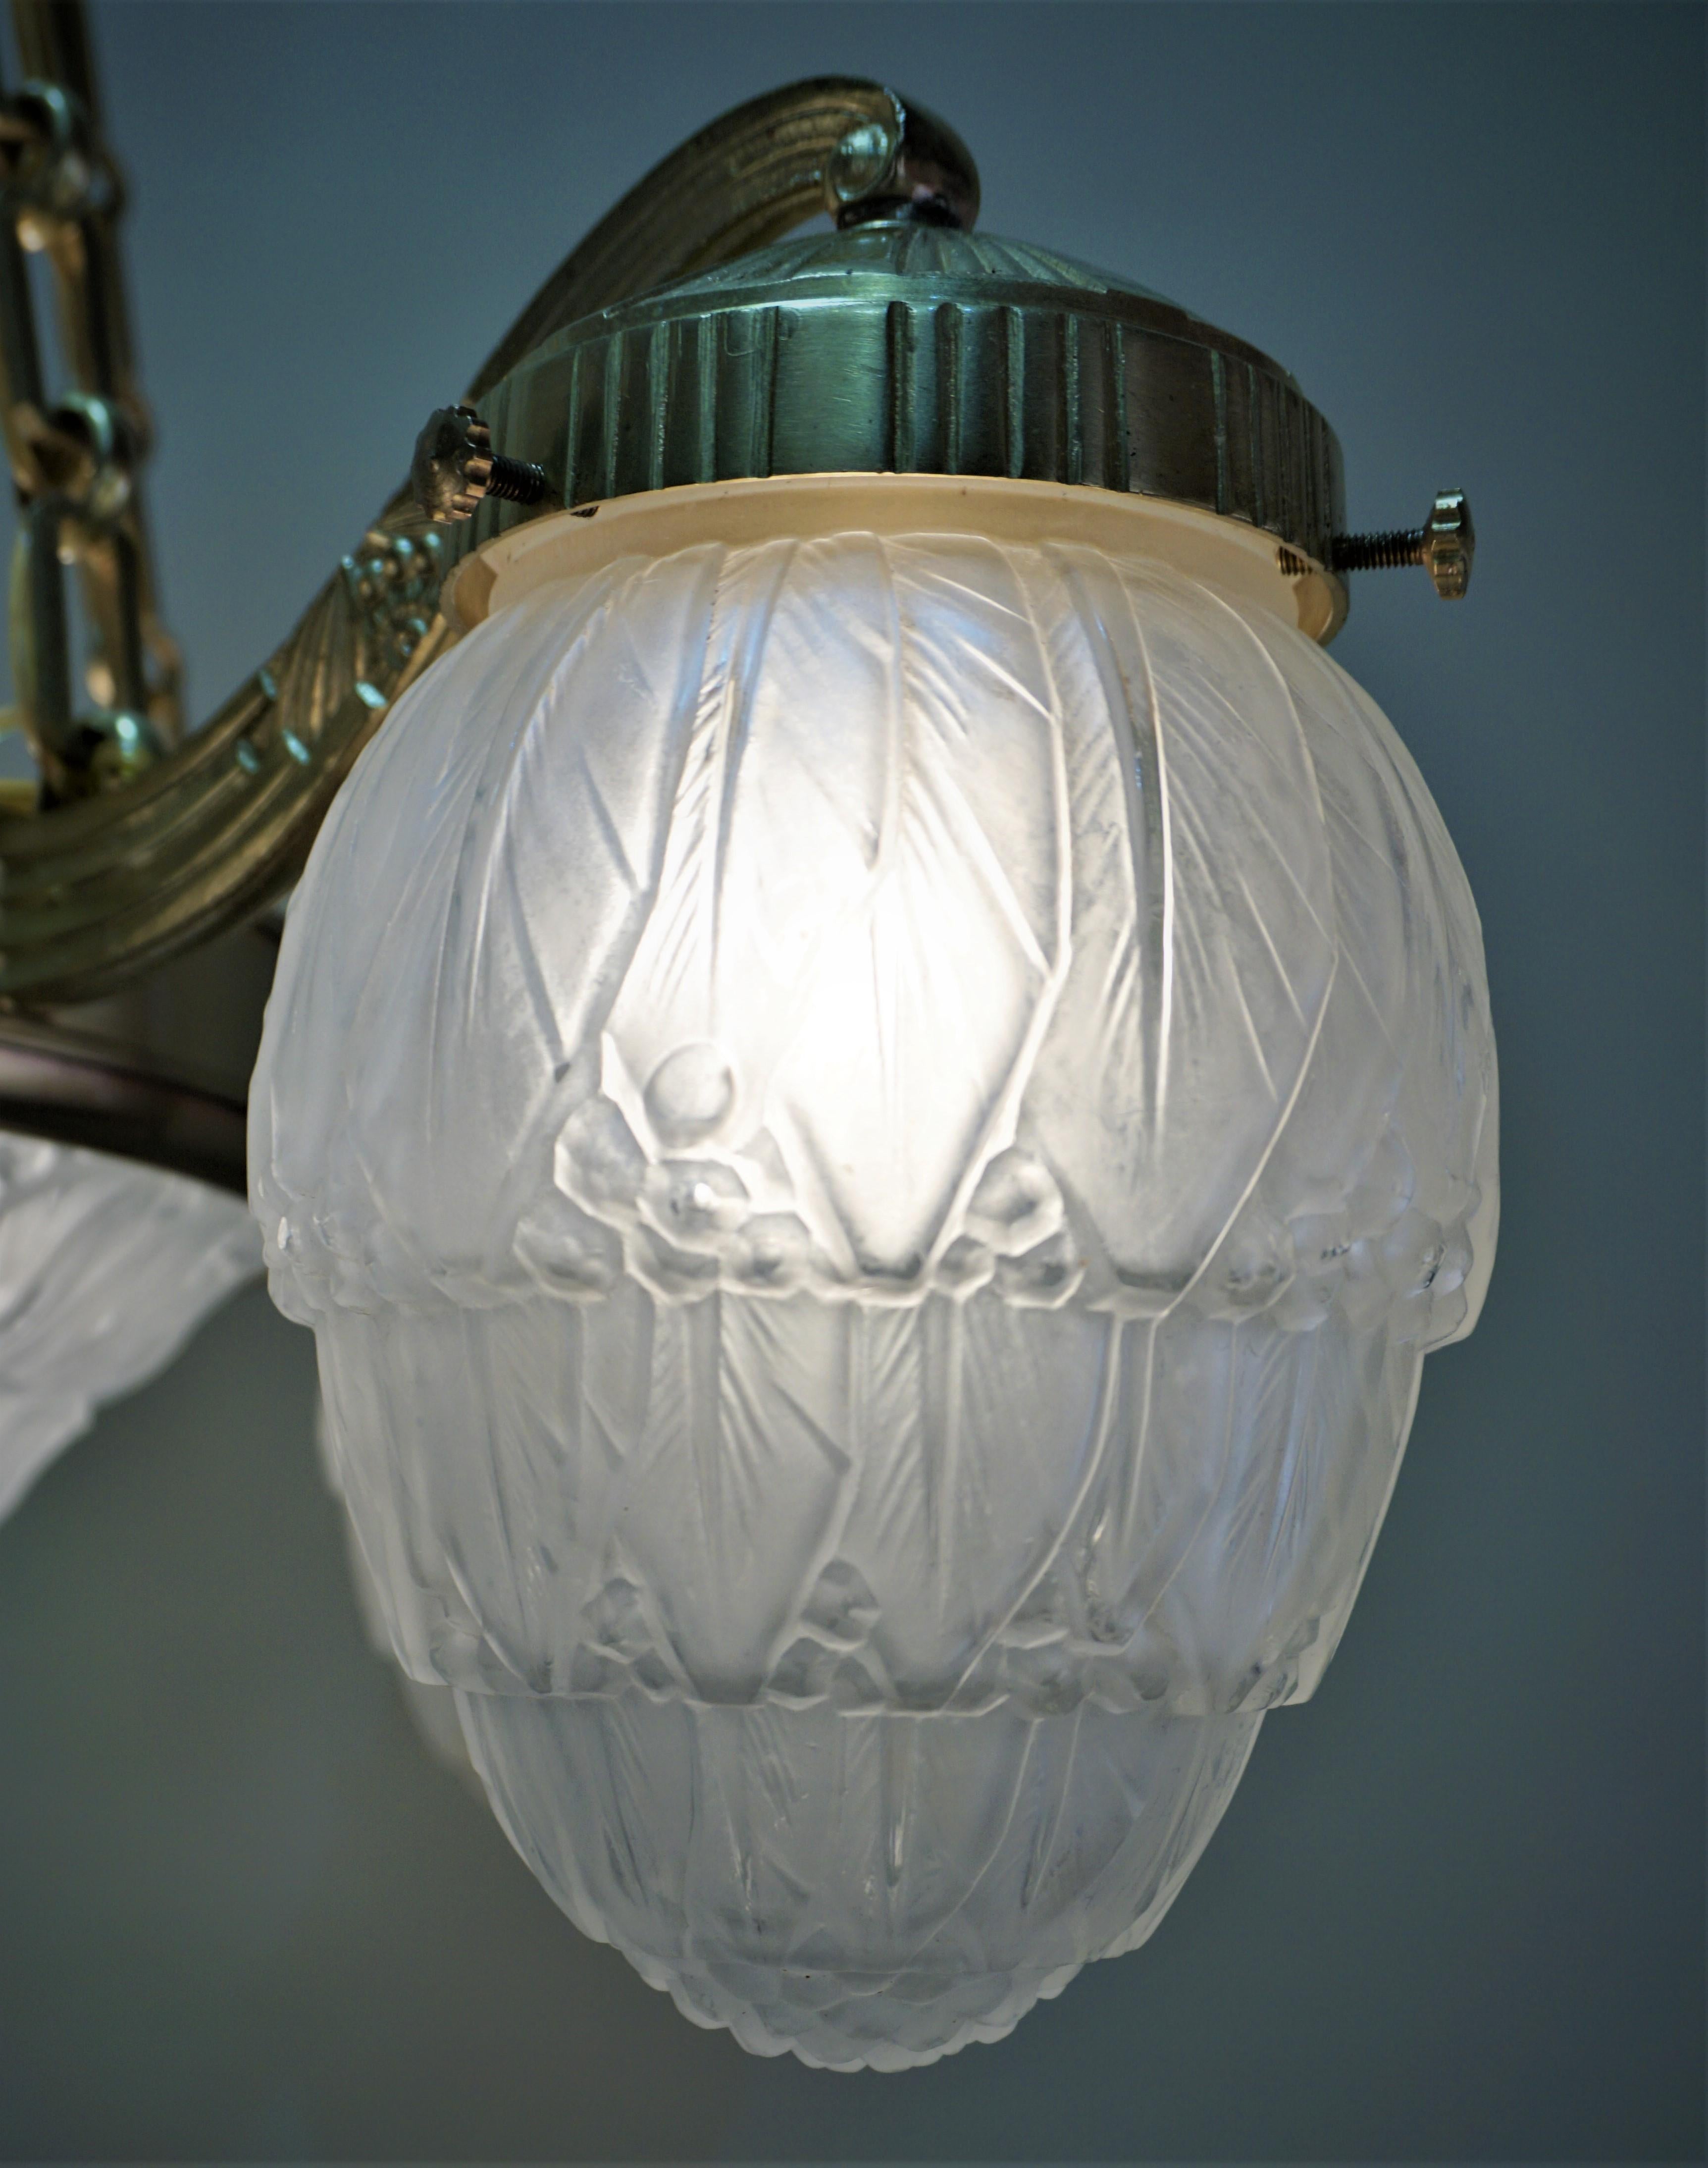 Early 20th Century French Art Deco Chandelier by Hettier & Vincent